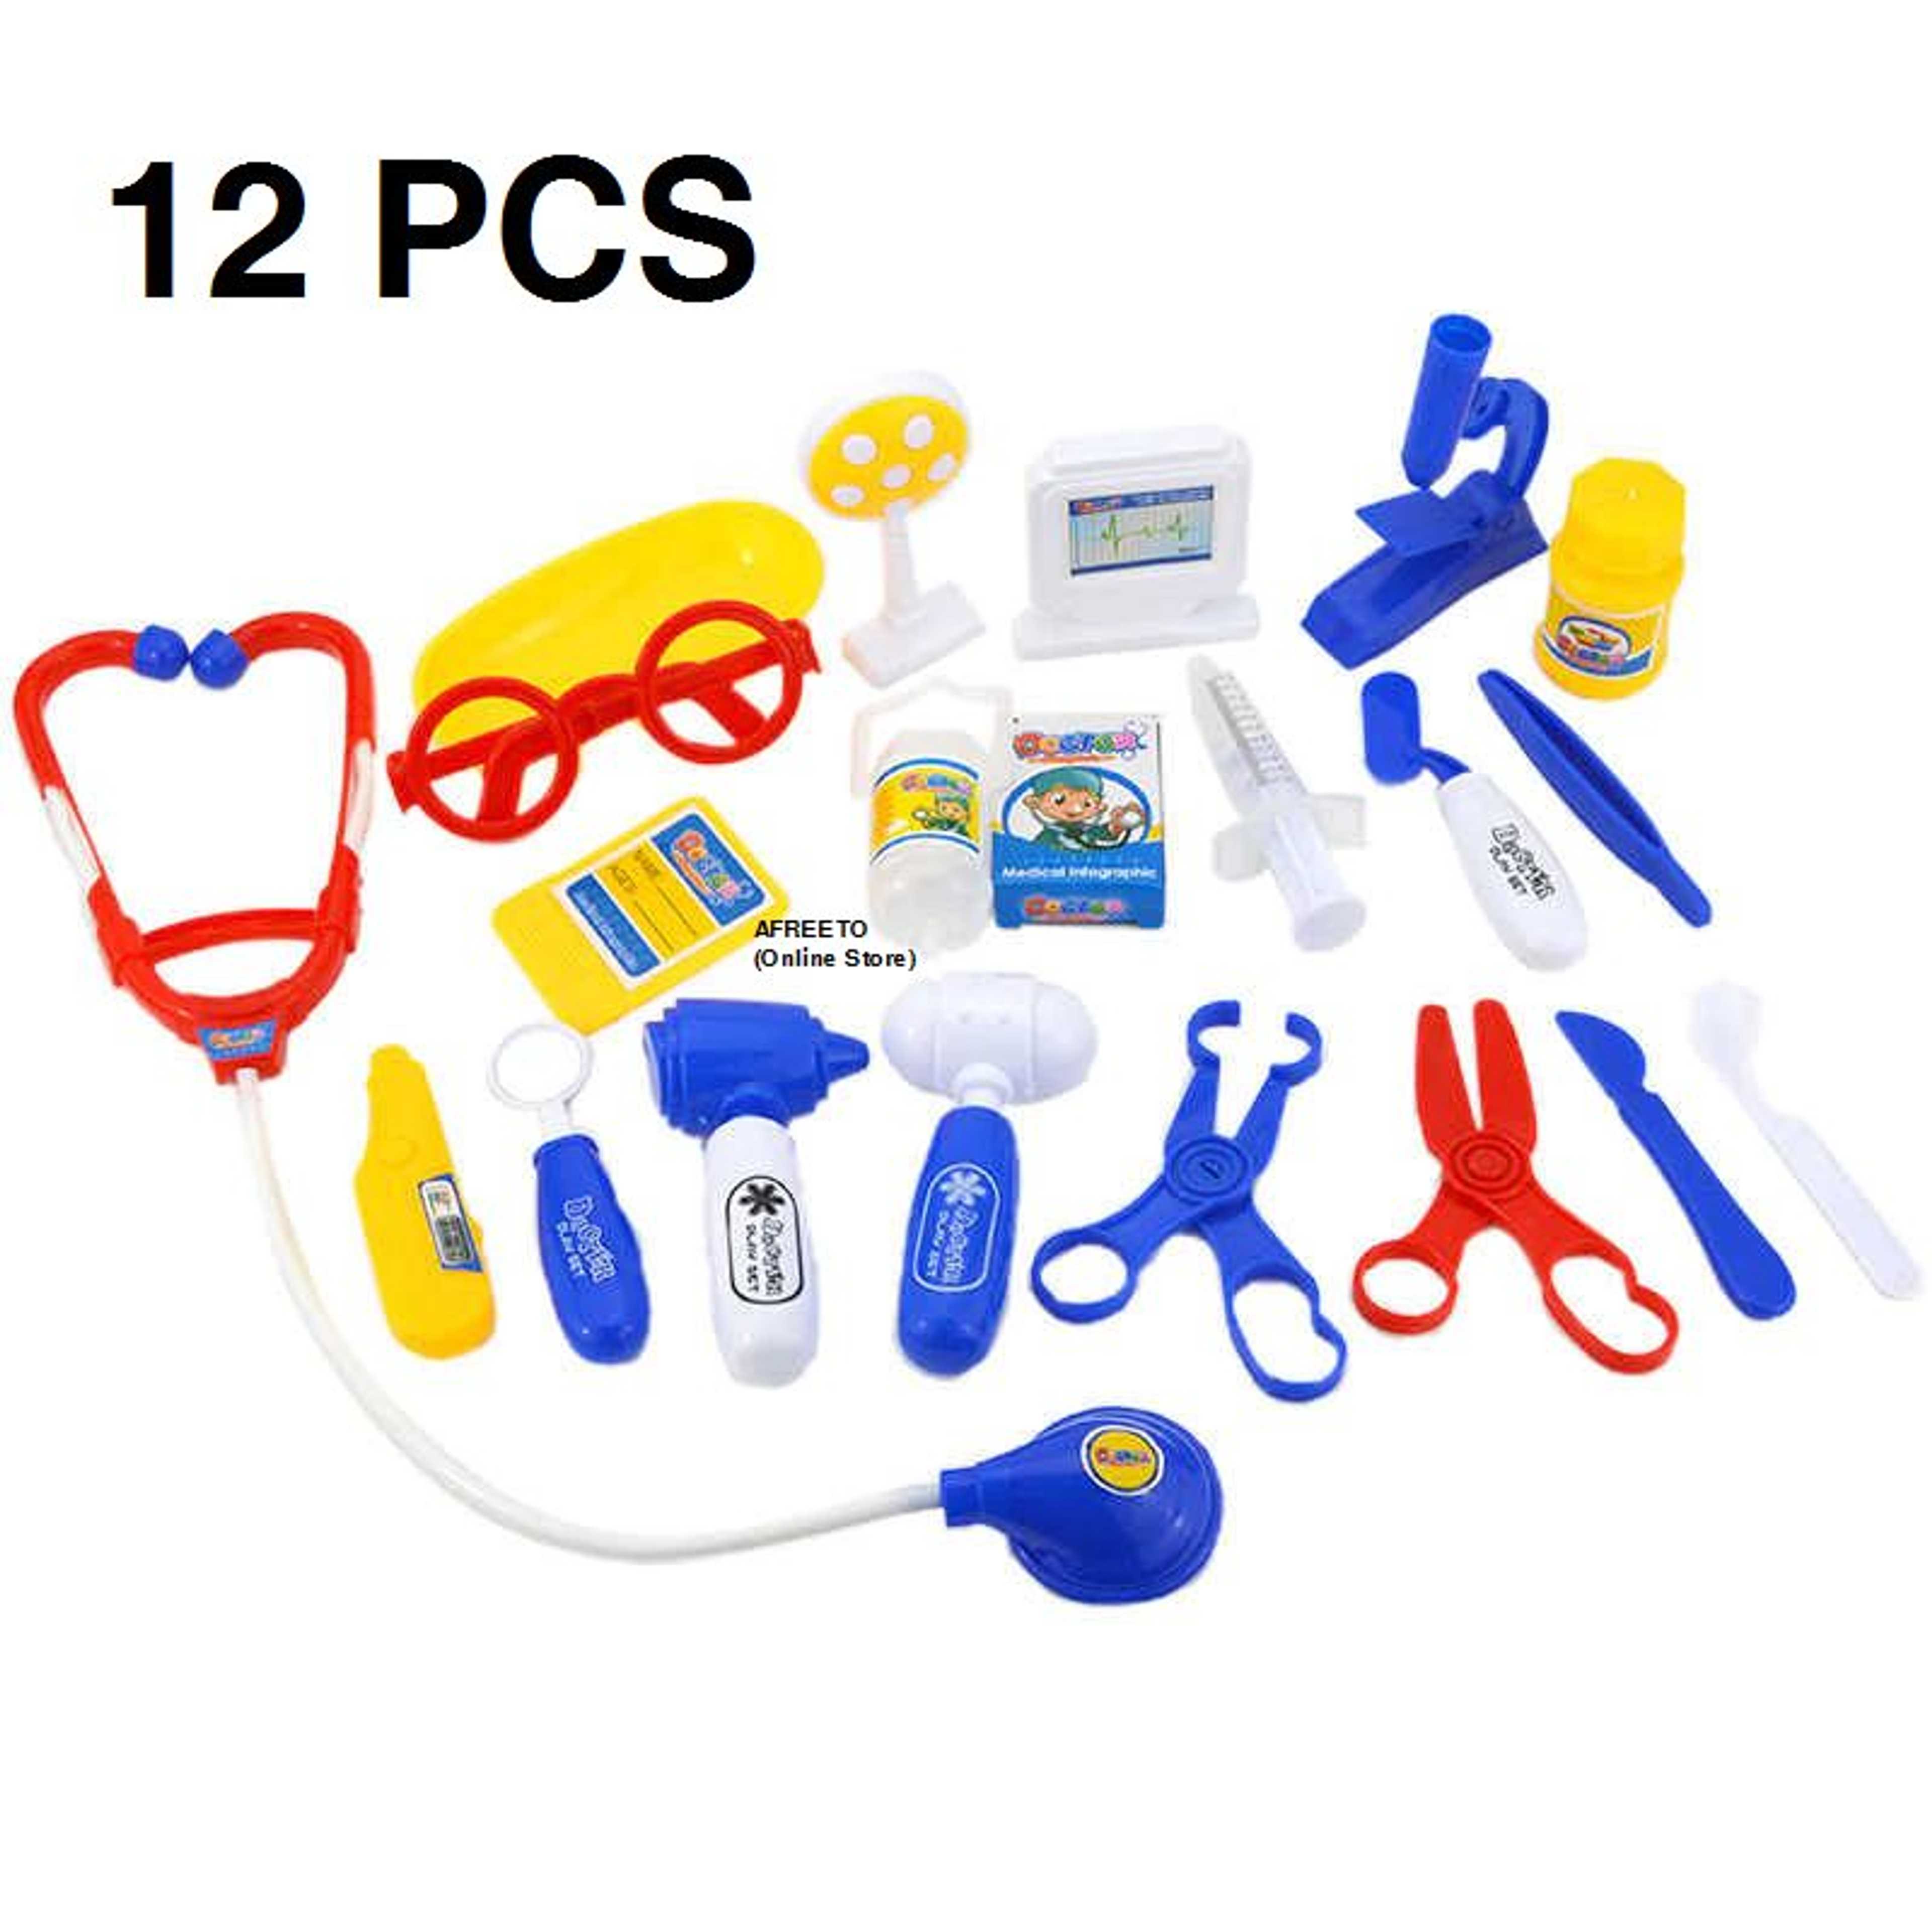 "12 Pieces Doctor Play Set Toy for Kids Doctor tool Set "